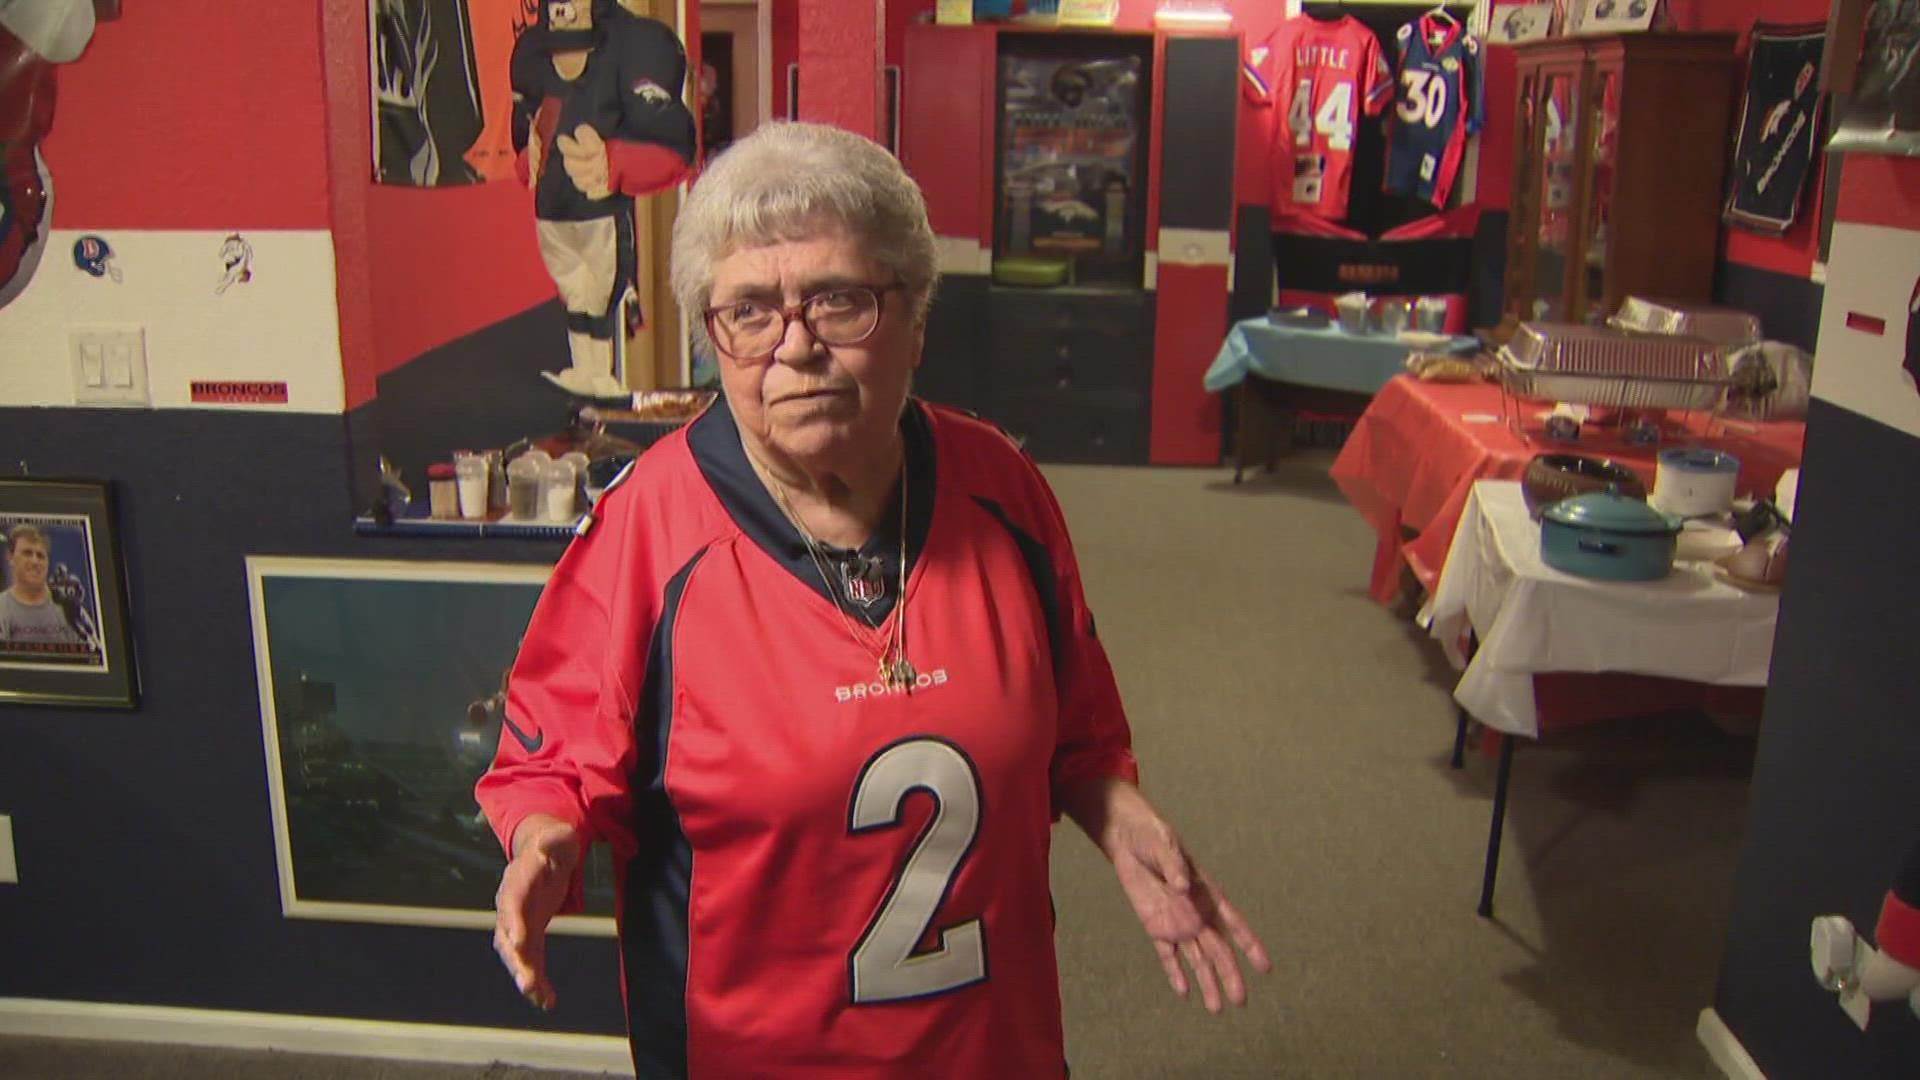 Loisa Van Schoick, 85, started following the Denver Broncos when they were formed in 1960, and her "Broncos basement" is a sight to behold.